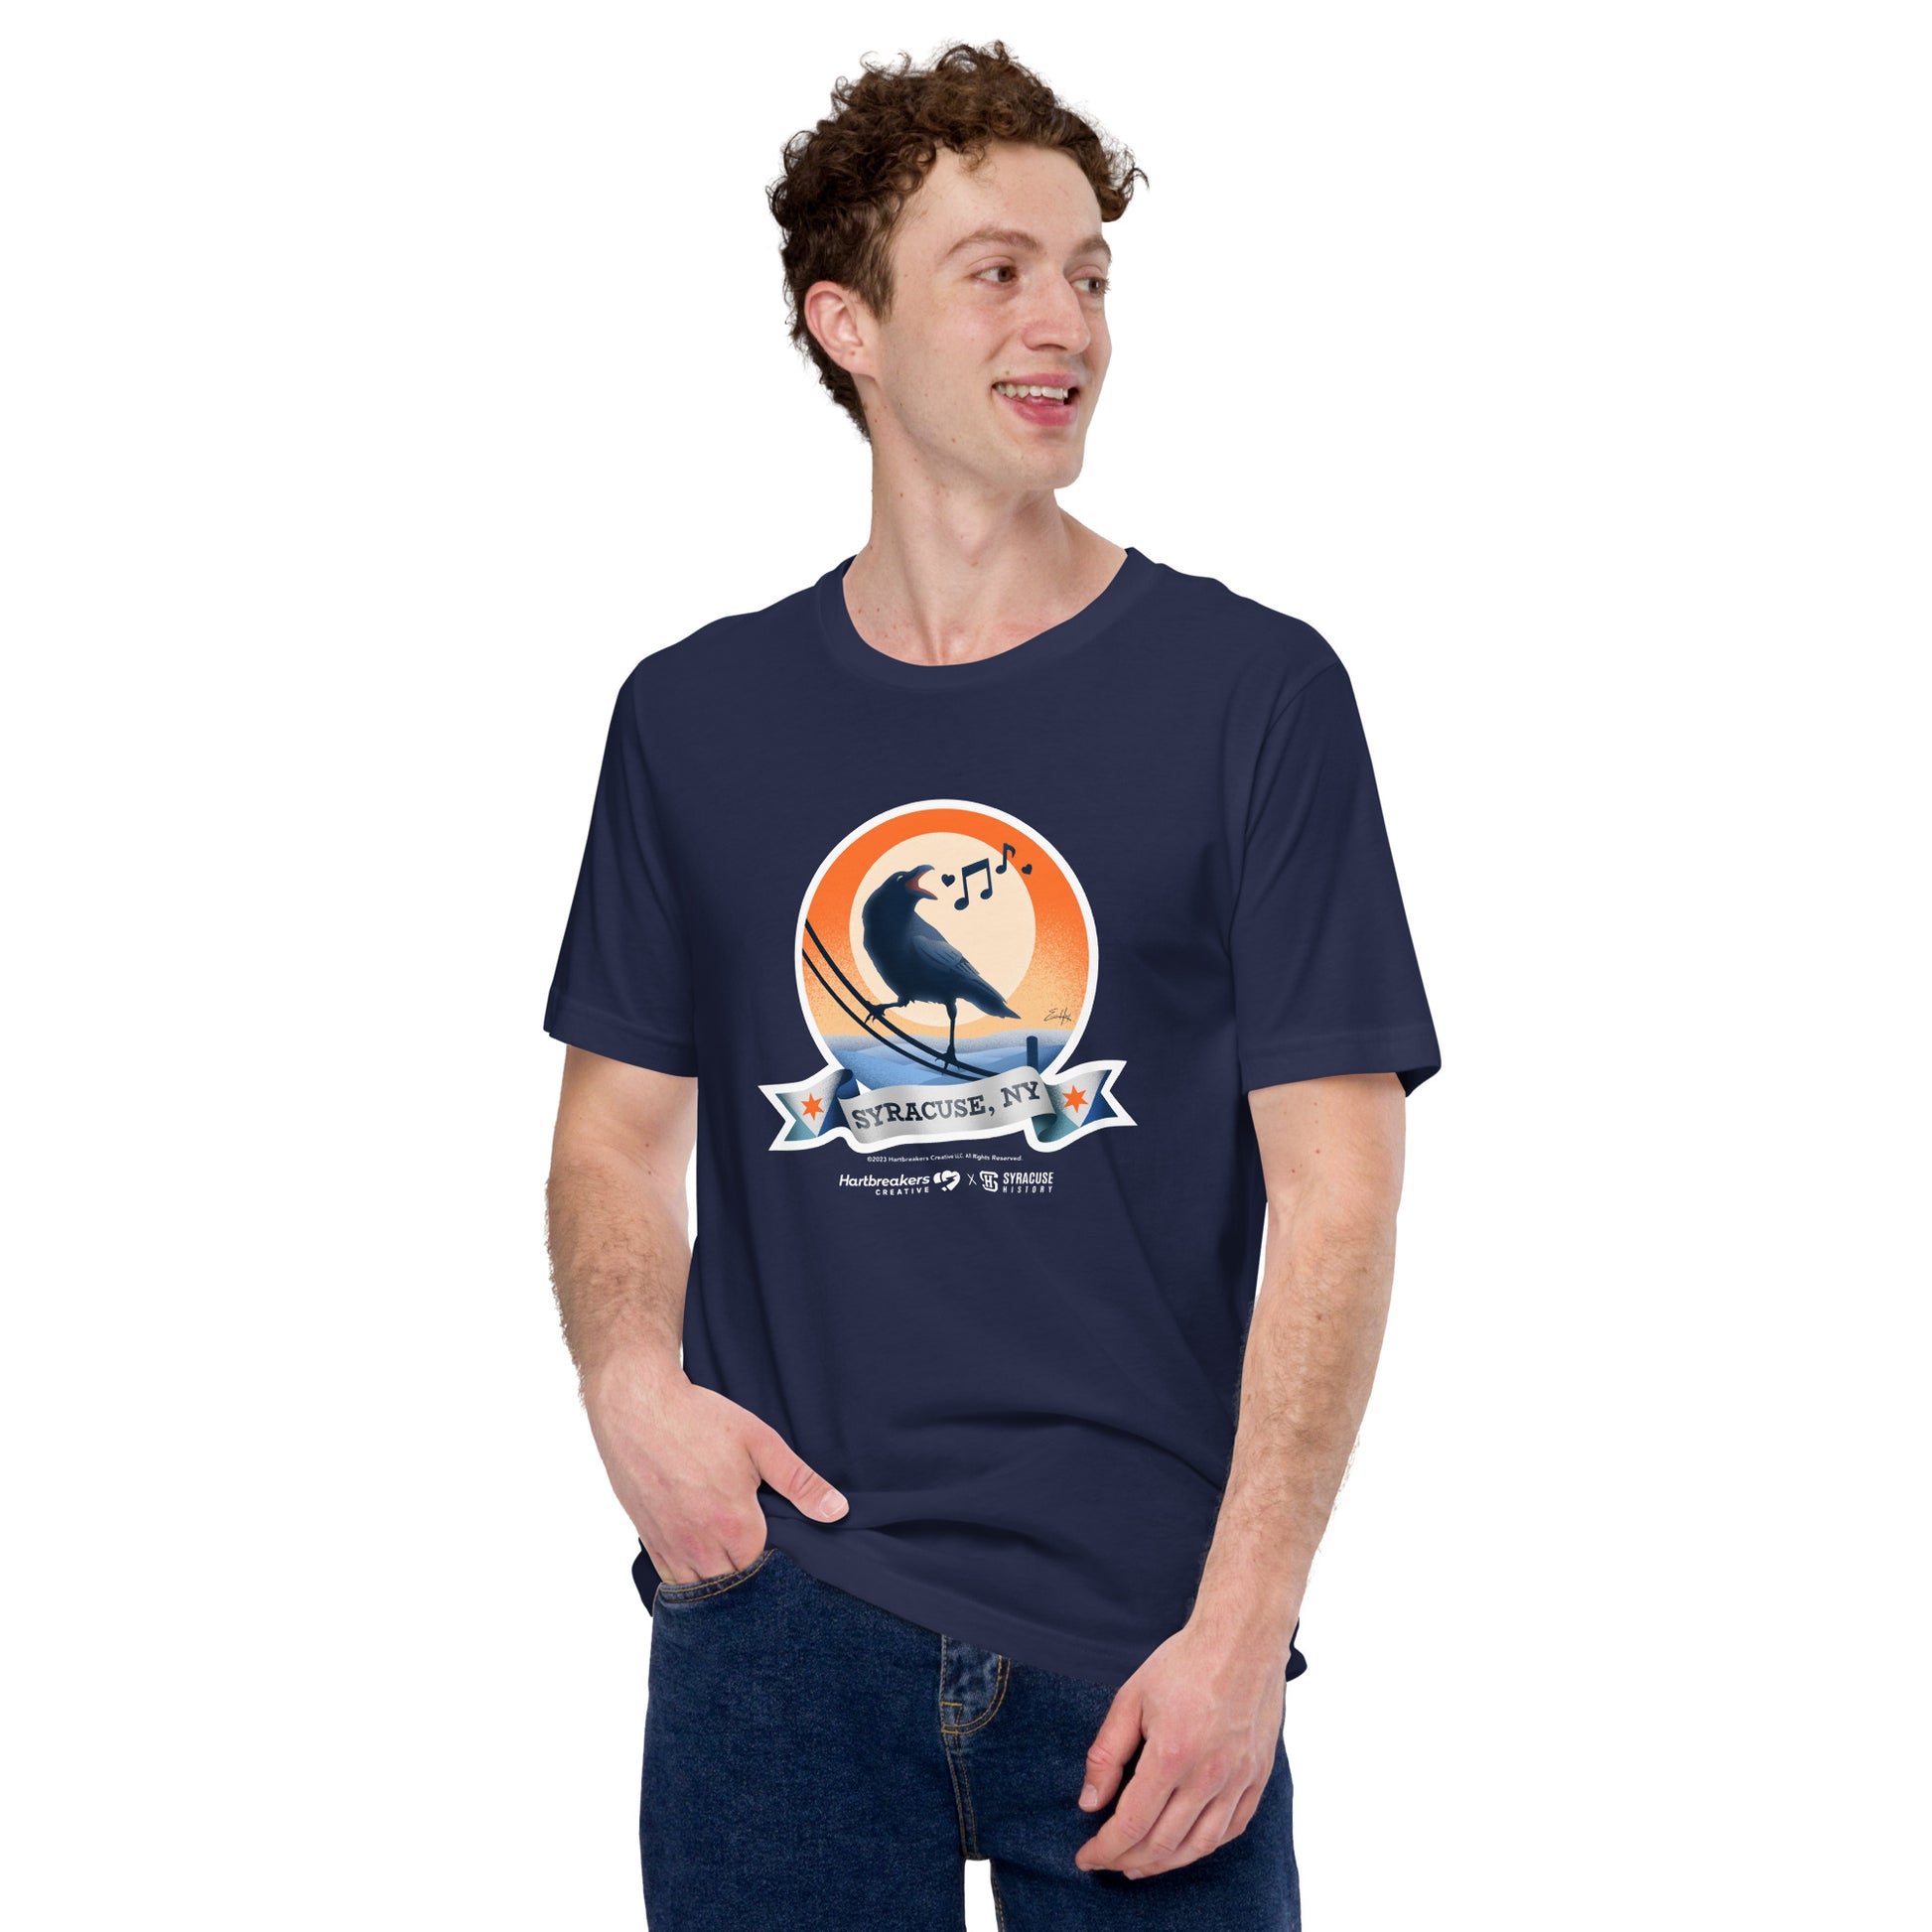 A man wearing a navy T-shirt featuring an illustration of a crow on a telephone wire and a banner beneath it that says Syracuse, NY